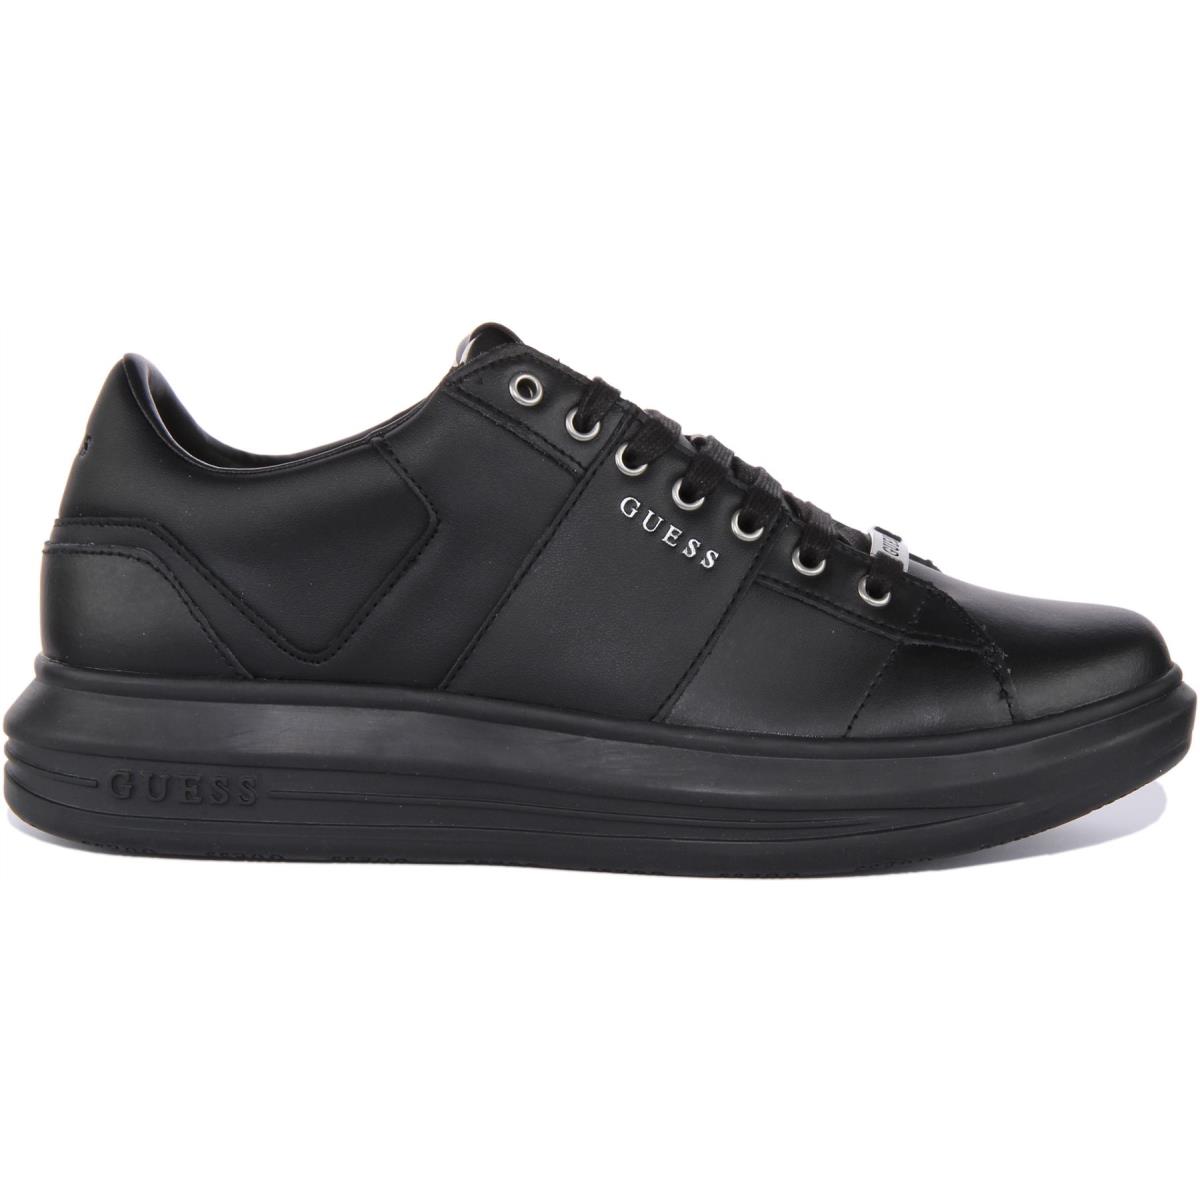 Guess Fm5Vbslea12 Vivo Salerno Mens Lace Up Low Sneaker In Black Size US 7 - 13